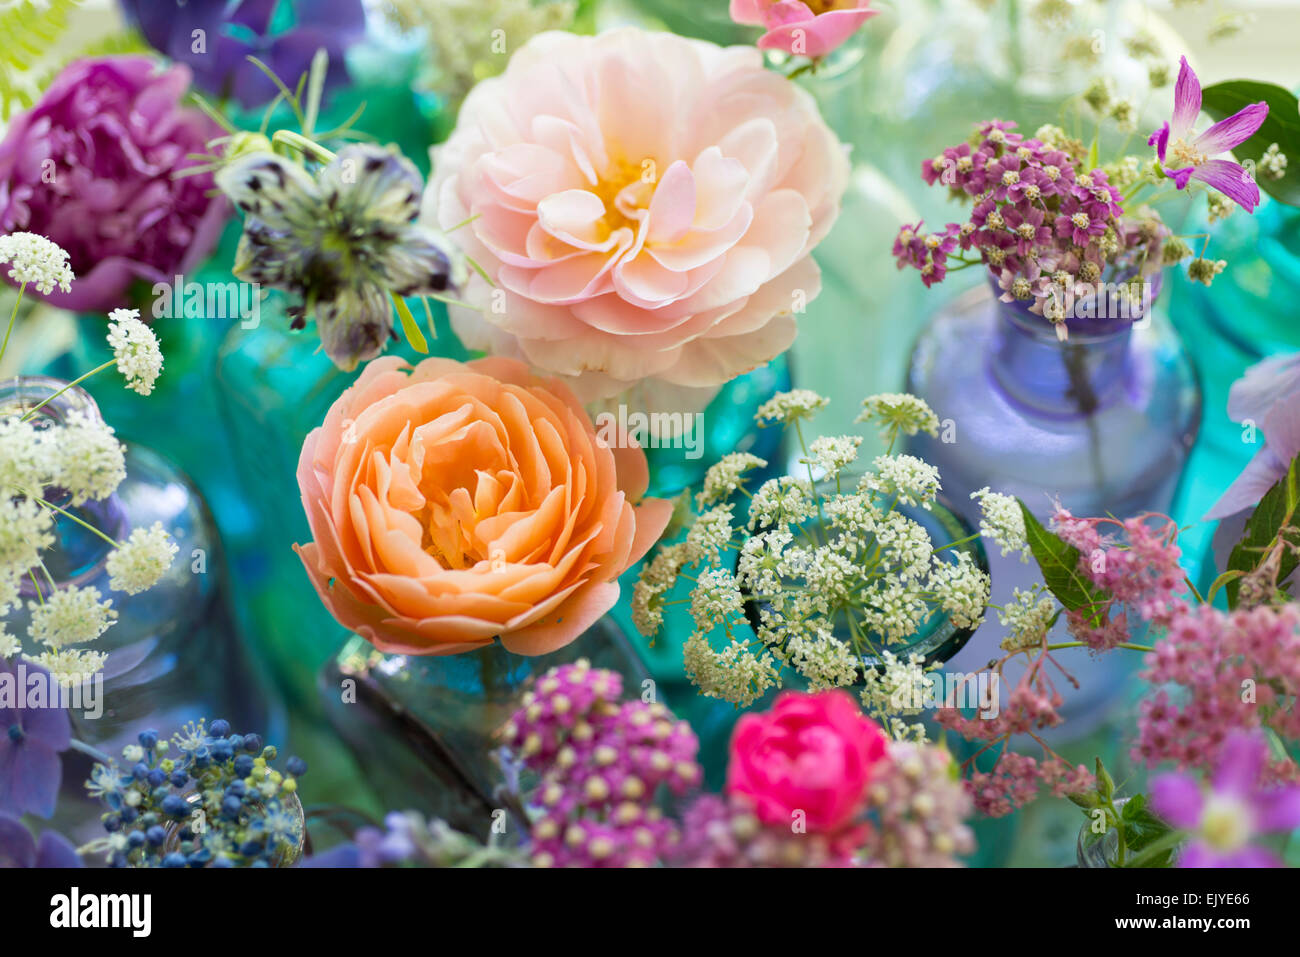 Floral arrangement of cut flowers in blue bottles including roses, hydrangea, peony, yarrow, feverfew and Queen Anne's Lace Stock Photo